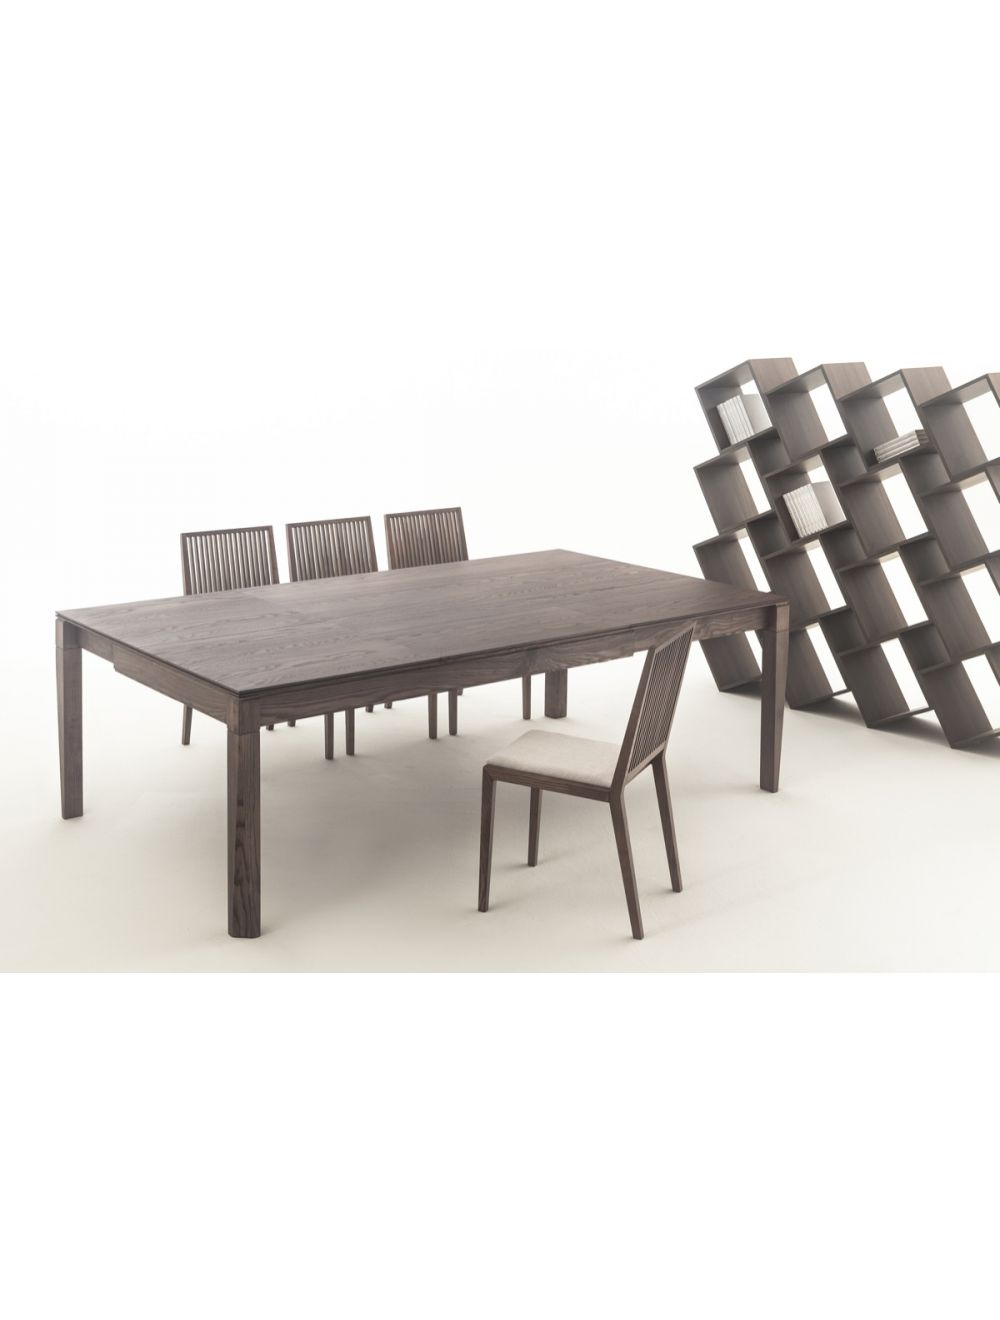 Plurimo square transformable table